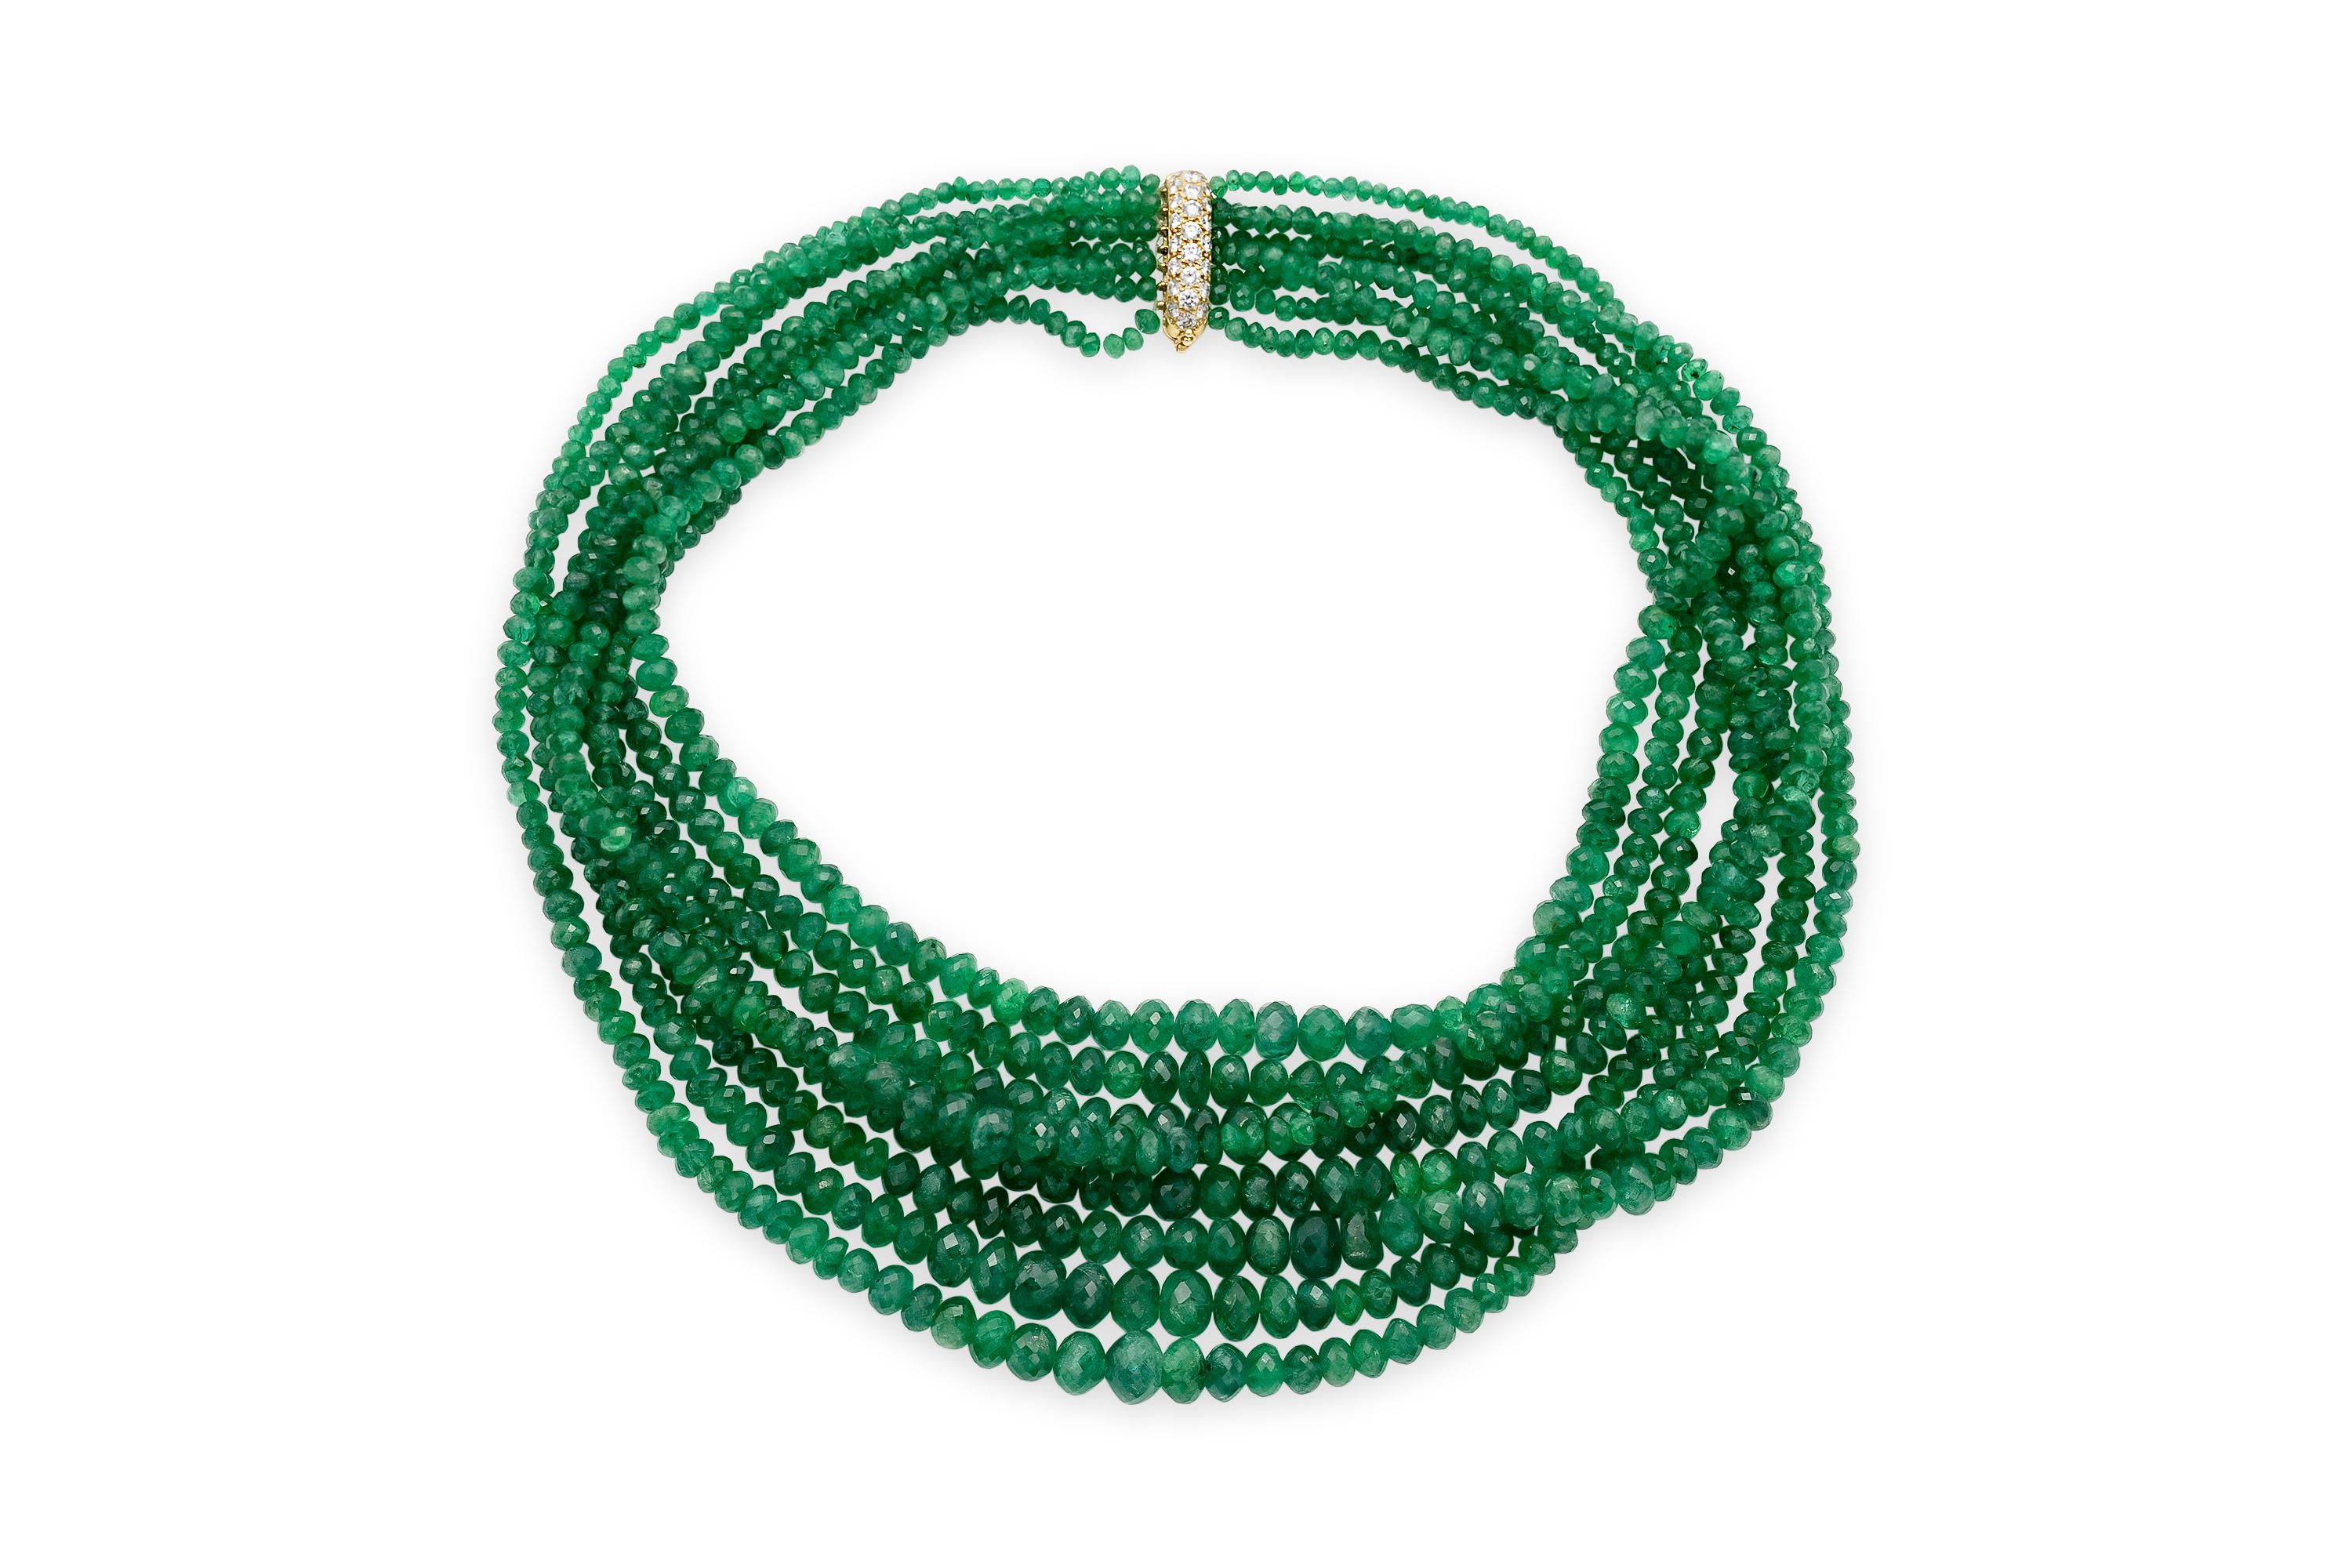 Finley crafted with 6 strands of Emerald beads weighing approximately a total of 850.00 carats.
The clasp is crafted in 18k yellow gold featuring 1.50 carats of Round Brillinat cut diamonds.